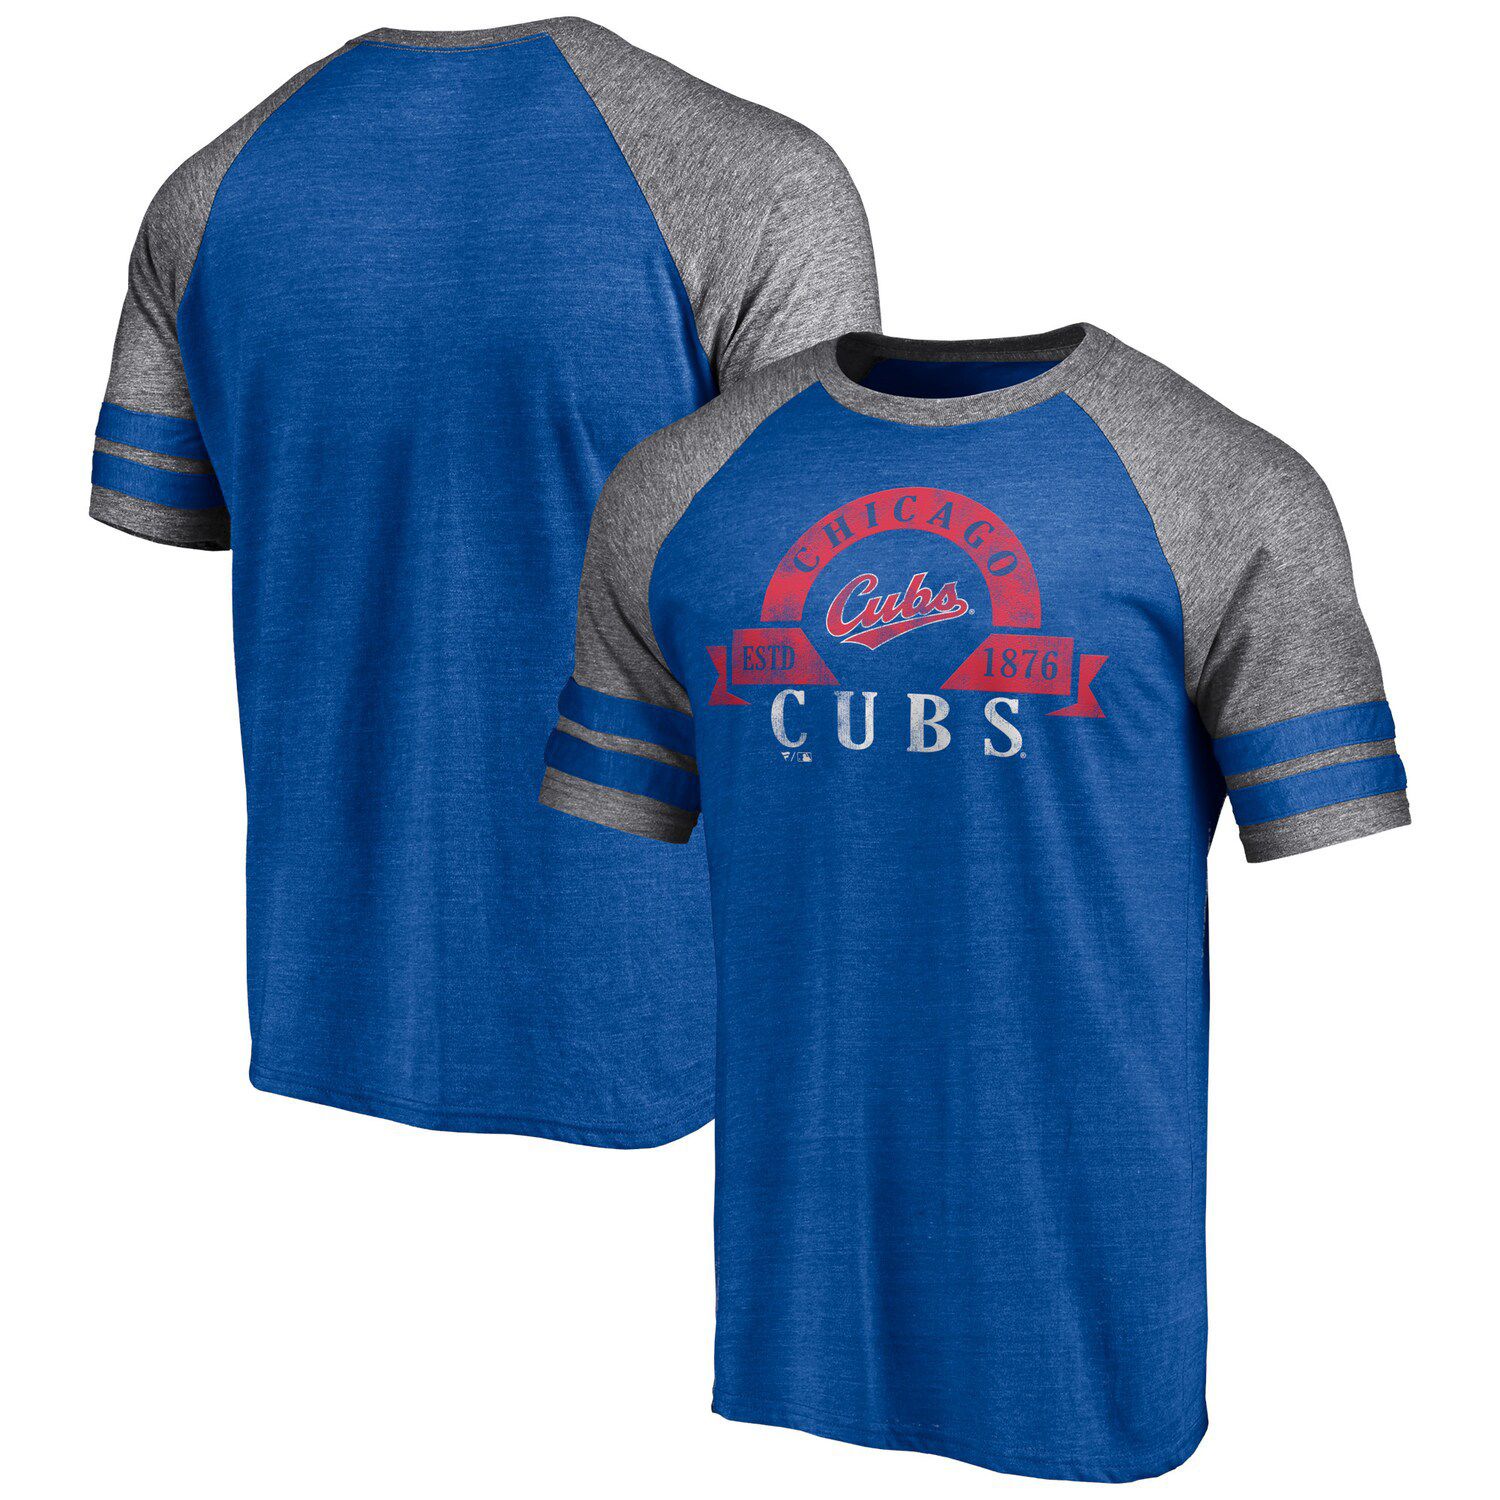 Men's Majestic Heathered Gray/Royal Chicago Cubs Big & Tall Cooperstown  Collection Raglan 3/4-Sleeve